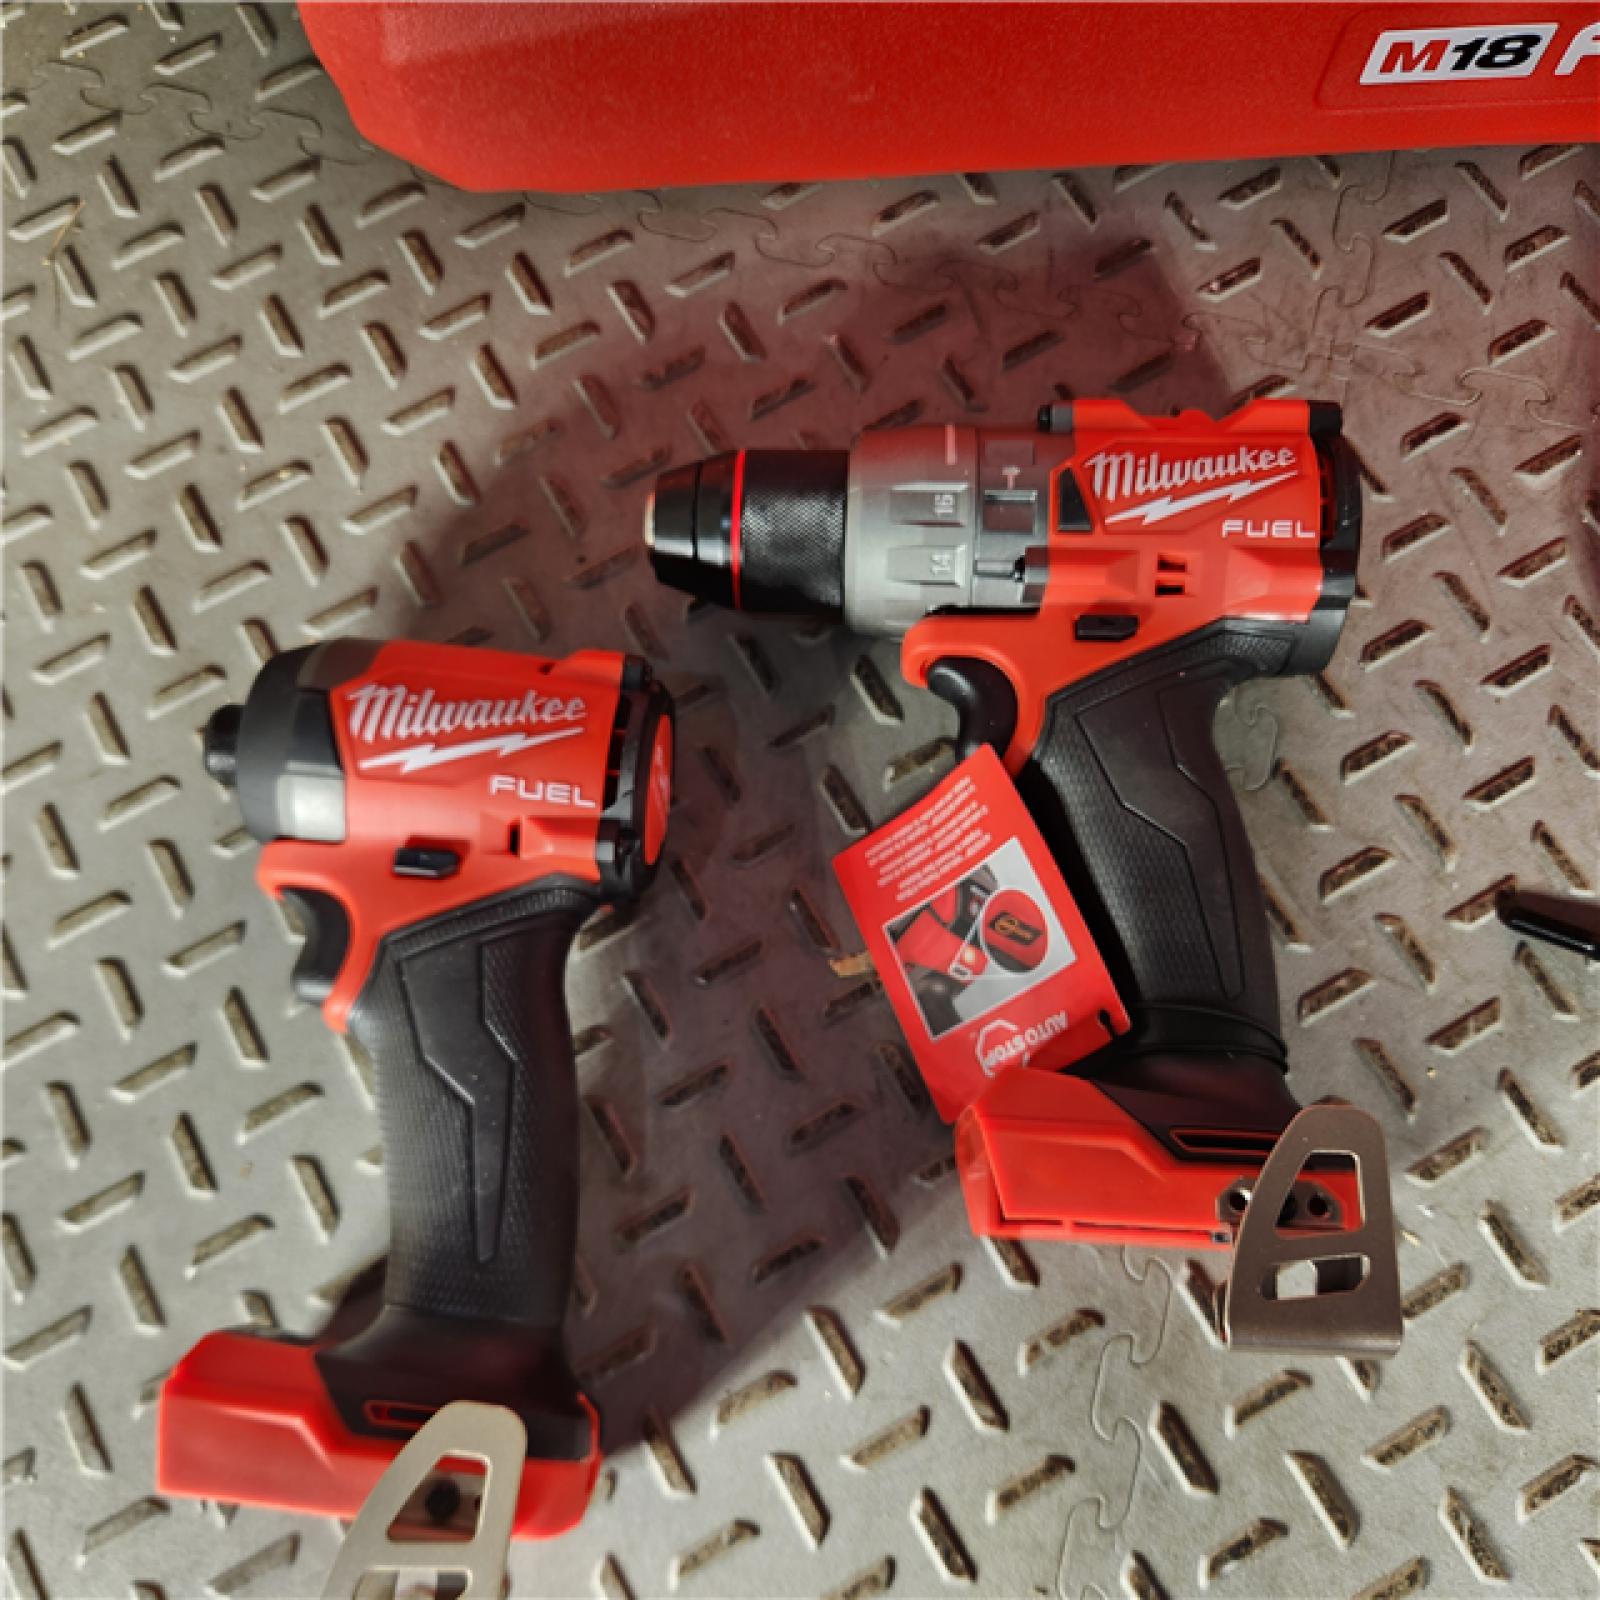 Houston Location - AS-IS 3697-22 M18 Drill & Hex Impact Combination Wrench (NO BATTRIES )